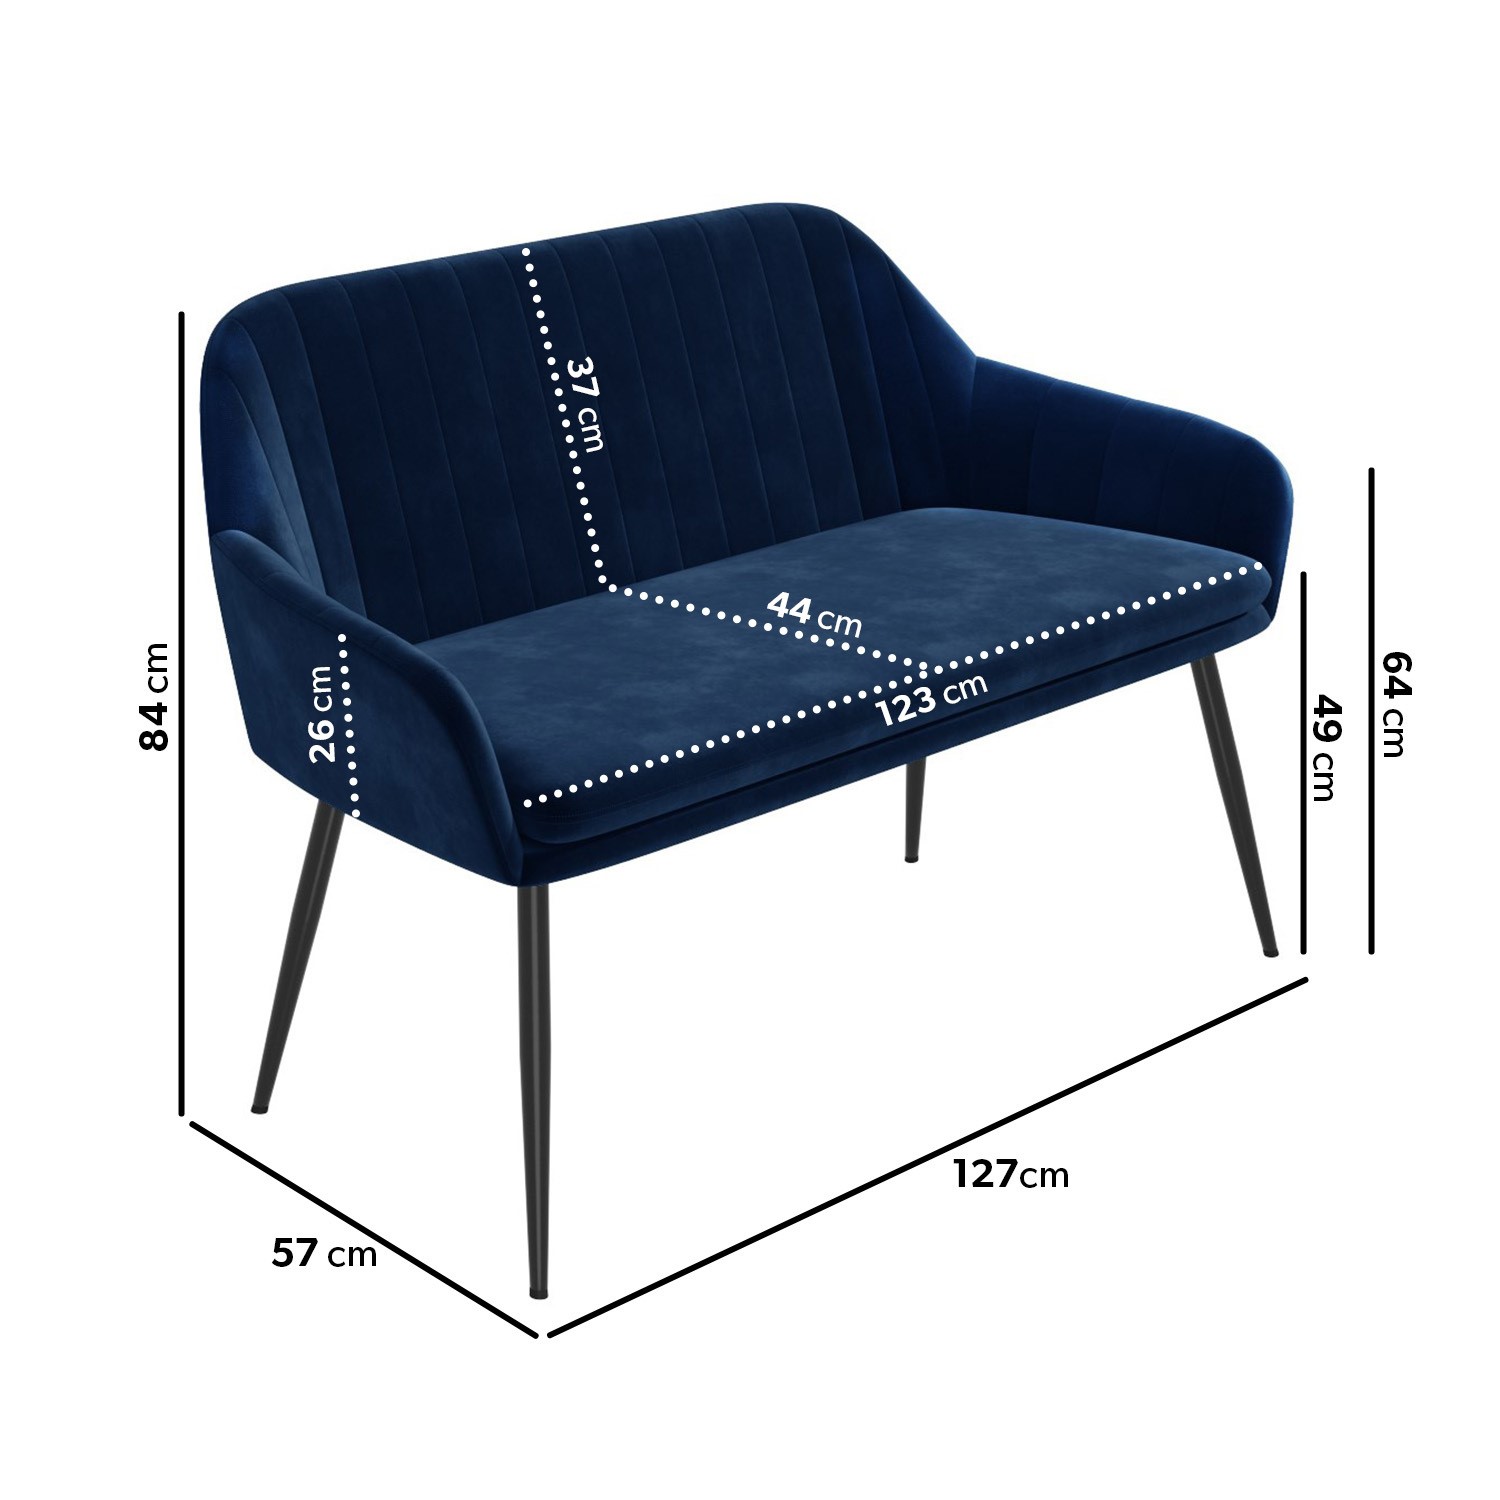 Read more about Large navy velvet dining bench with back seats 2 logan